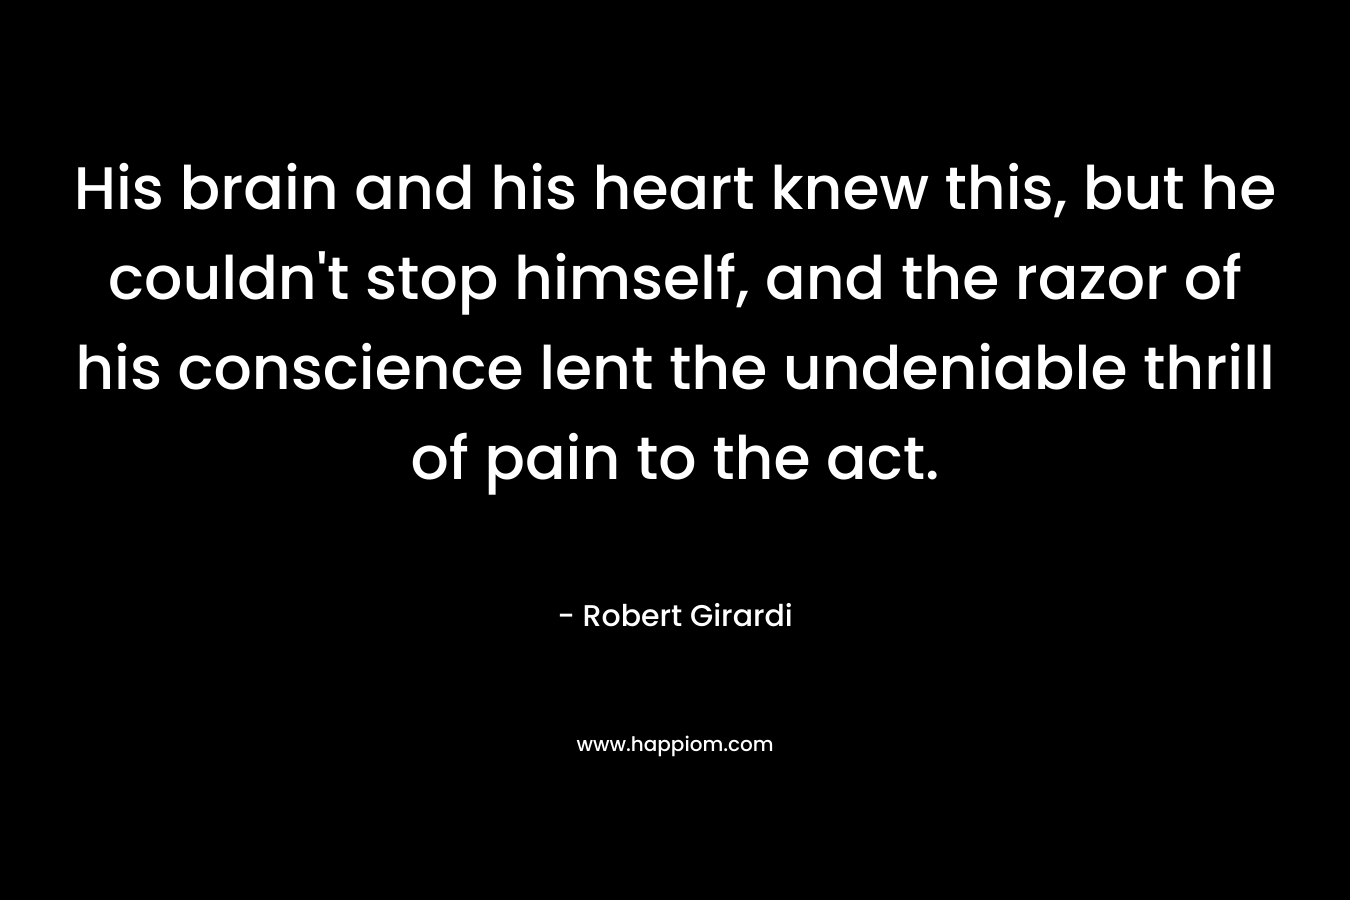 His brain and his heart knew this, but he couldn’t stop himself, and the razor of his conscience lent the undeniable thrill of pain to the act. – Robert Girardi